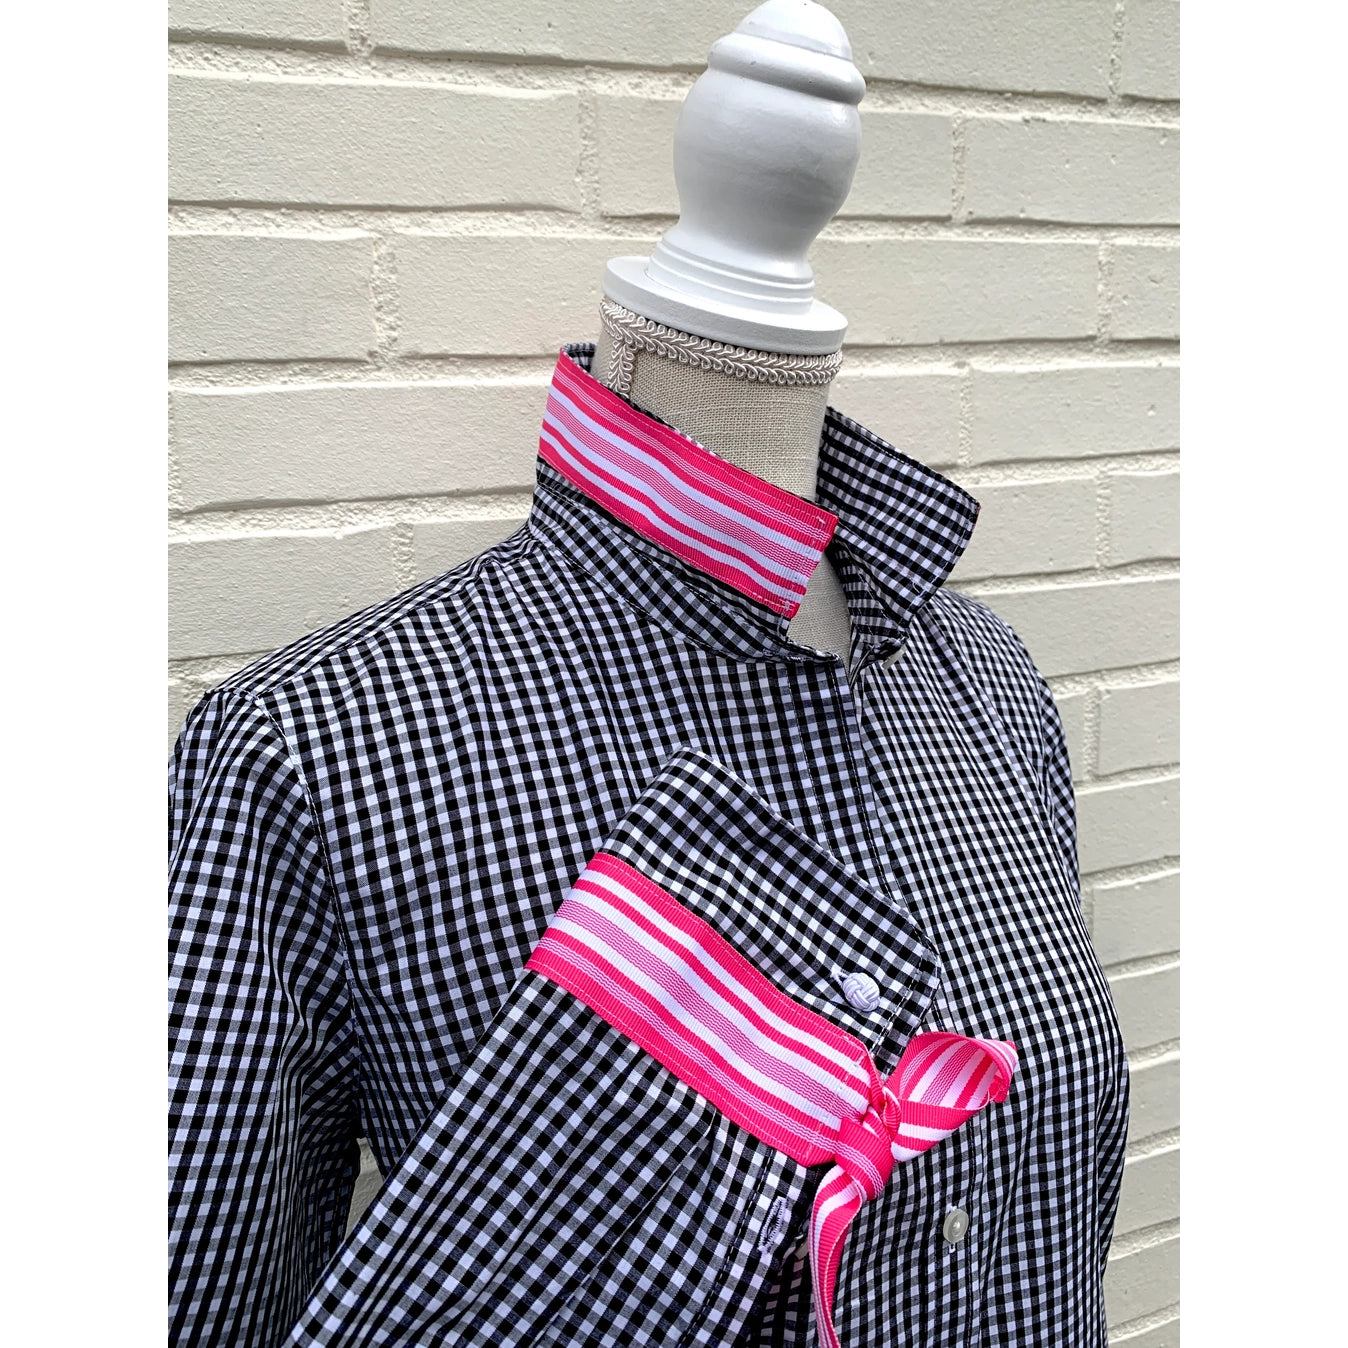 Audrey Black Gingham Blouse with Pink Accents